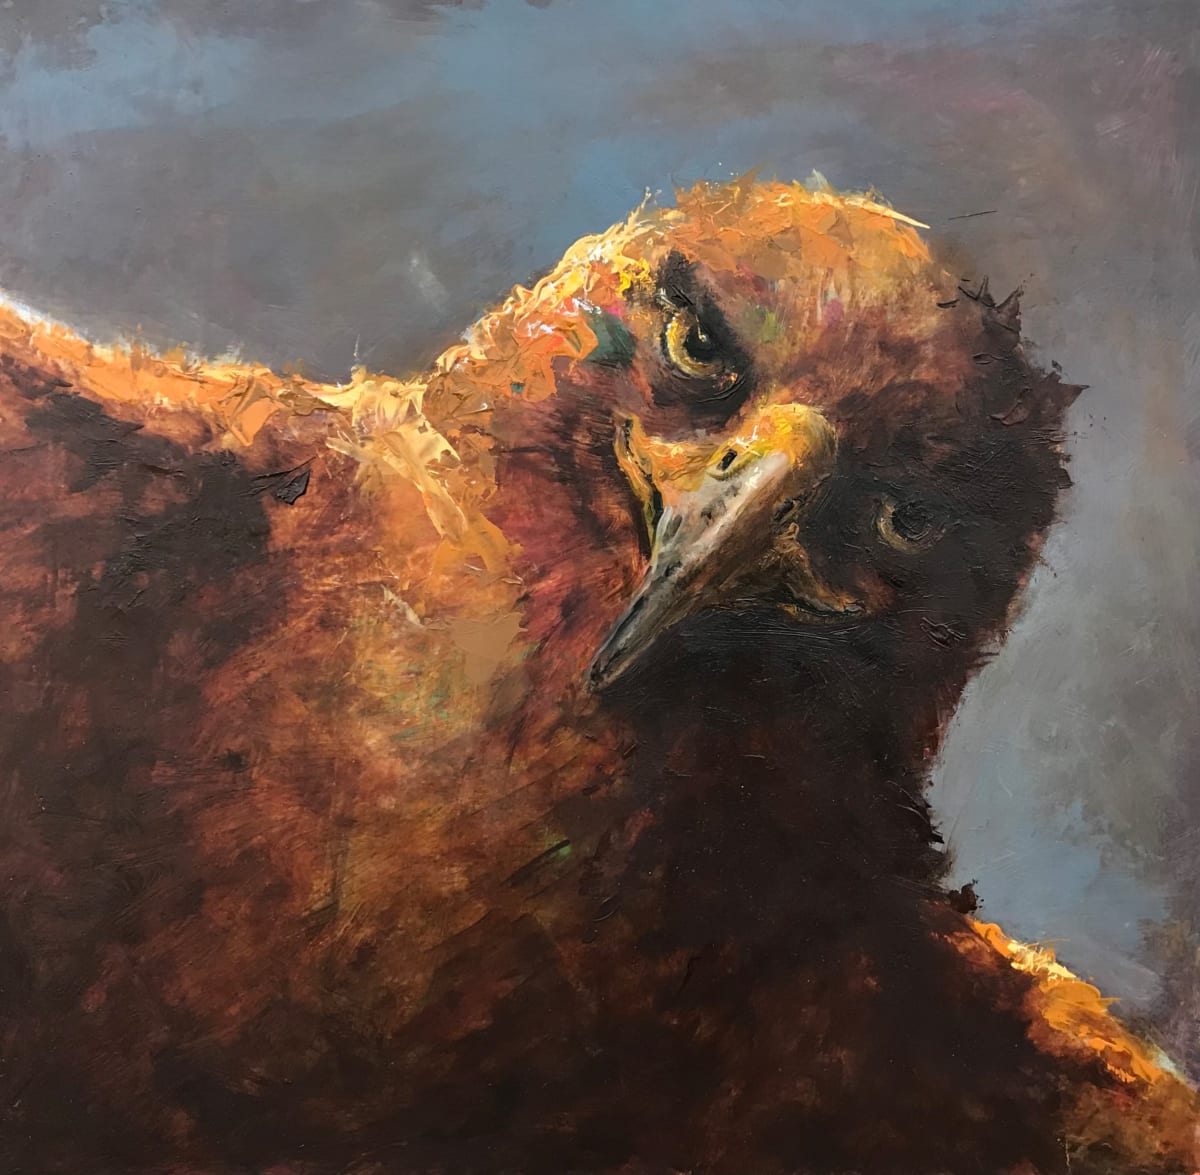 The Aviator by Susan F. Schafer Studio  Image: Inspired by the feeling that eagles soar above us like angels from heaven.